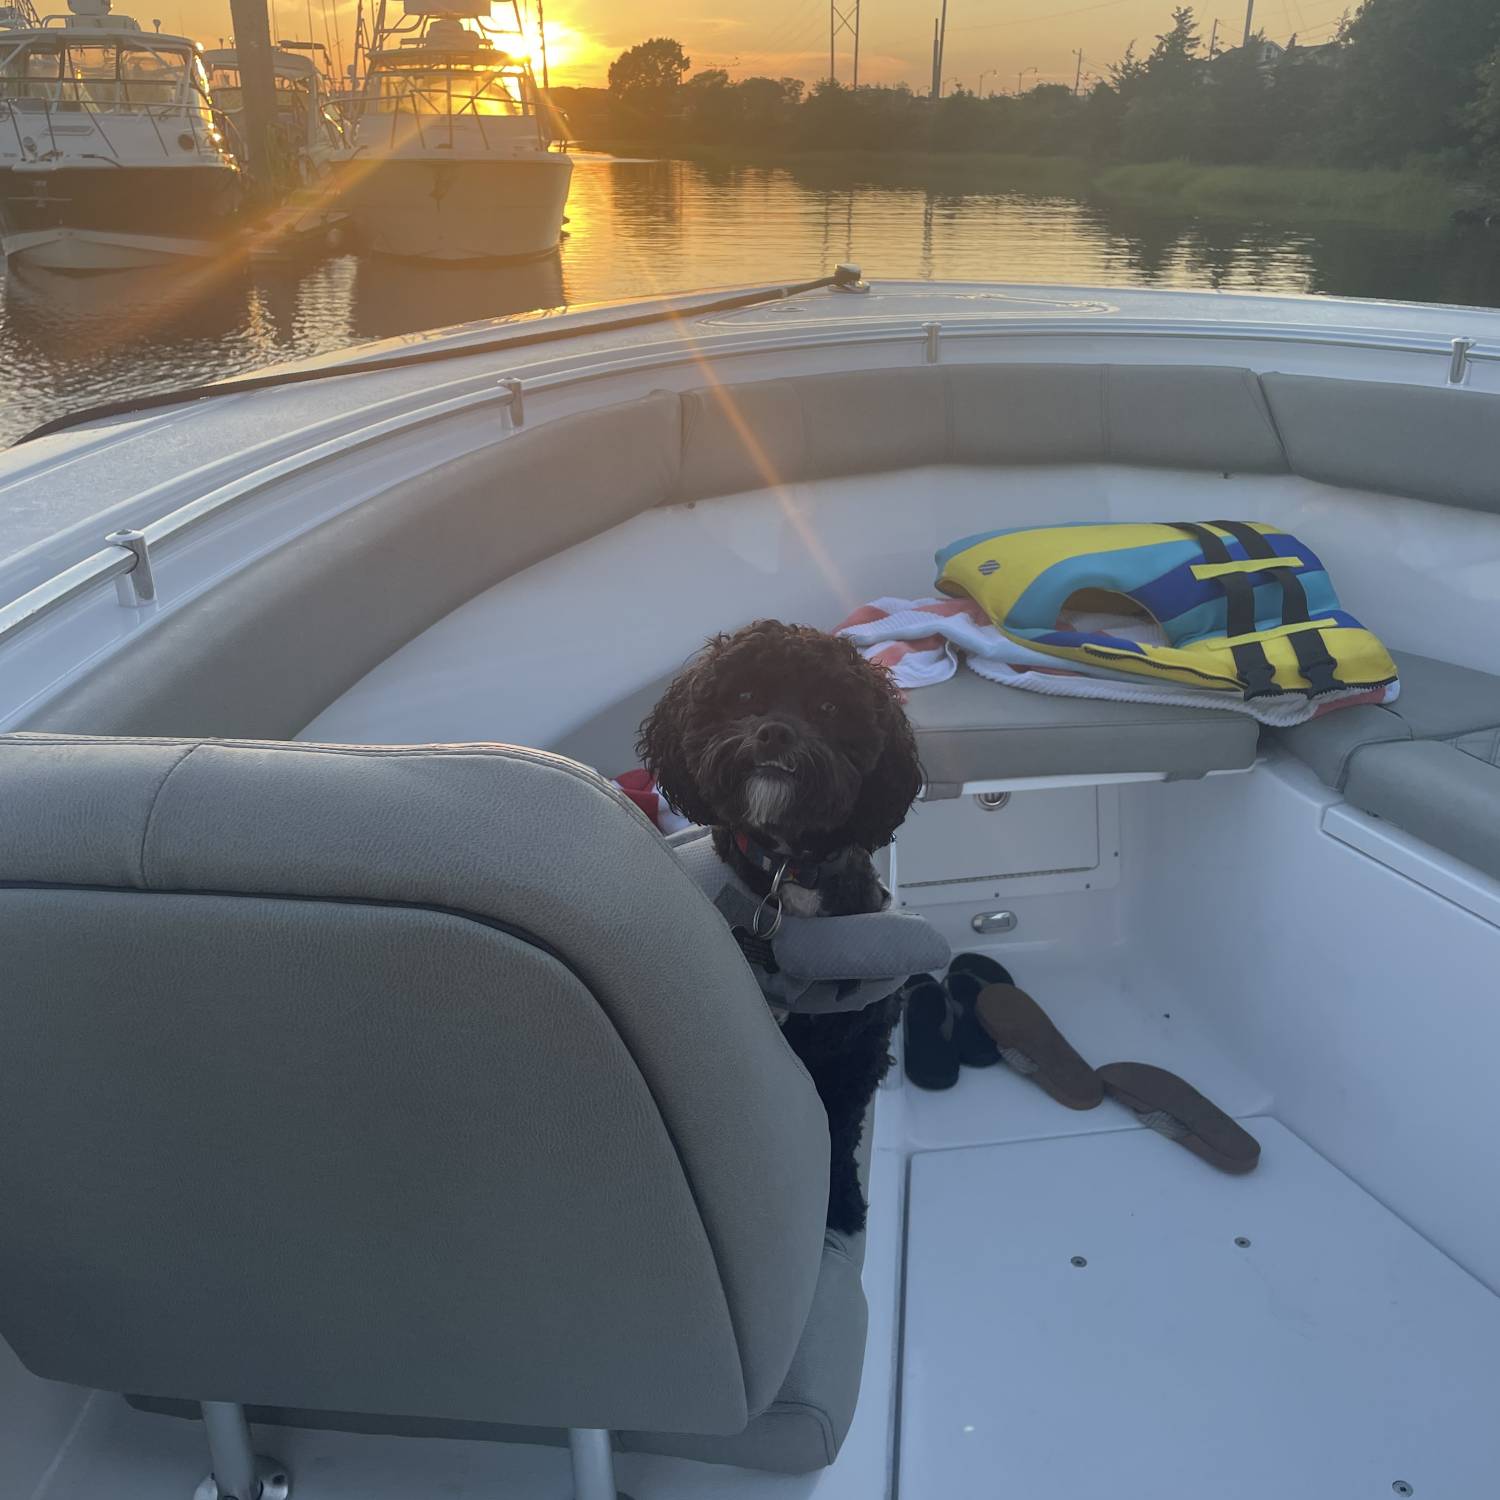 Title: Boating with Bill - On board their Sportsman Open 302 Center Console - Location: Buzzards Bay, MA. Participating in the Photo Contest #SportsmanSeptember